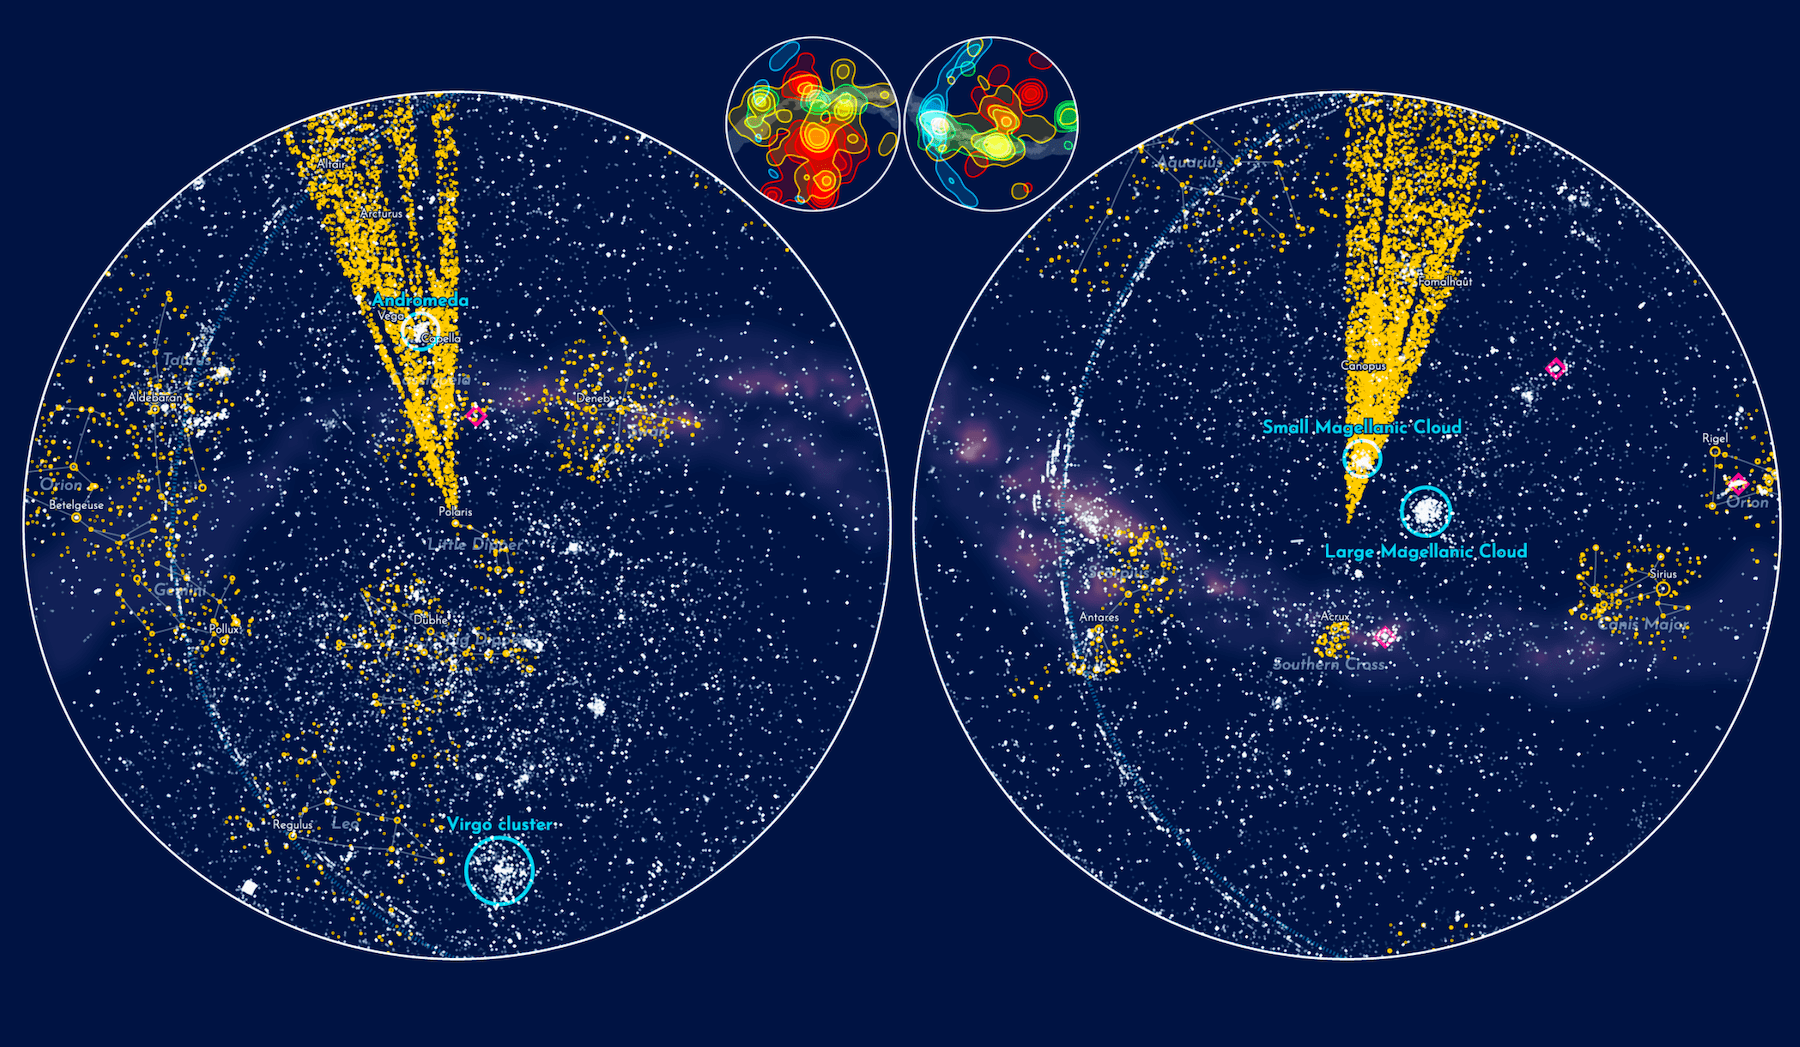 this image shows two hubble space telescope images